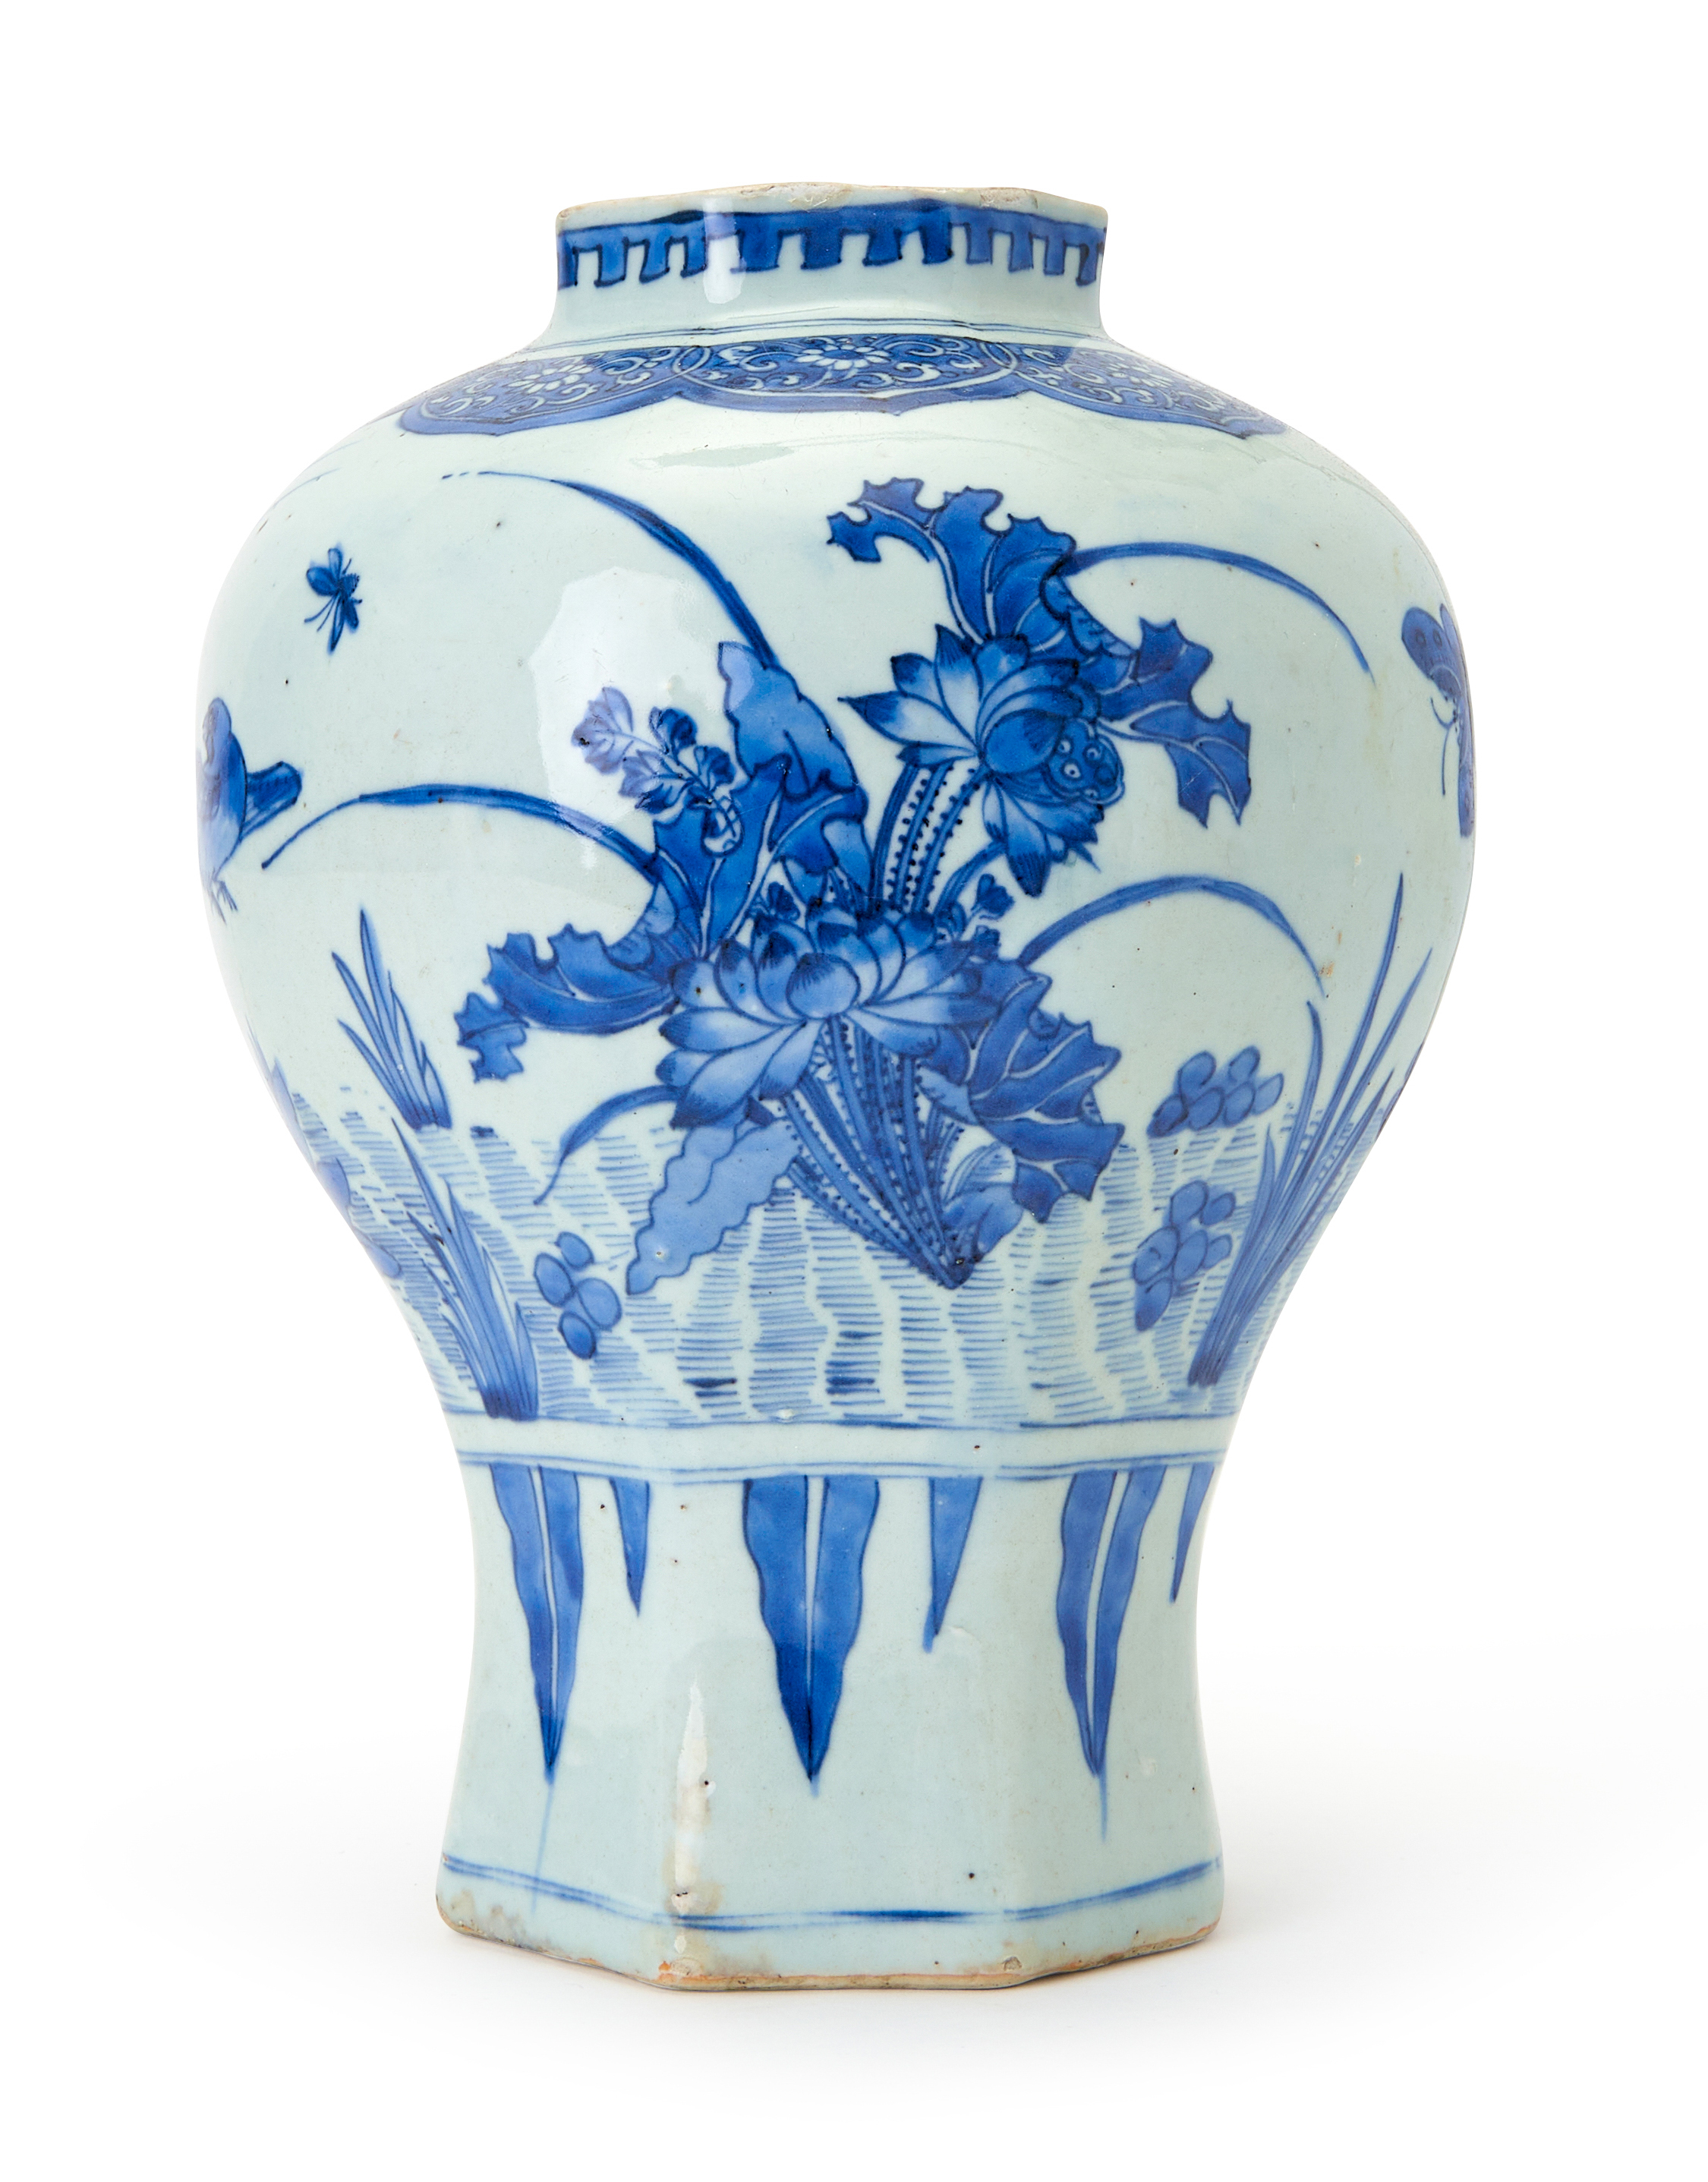 A CHINESE BLUE & WHITE JAR, TRANSITIONAL PERIOD, 17TH CENTURY